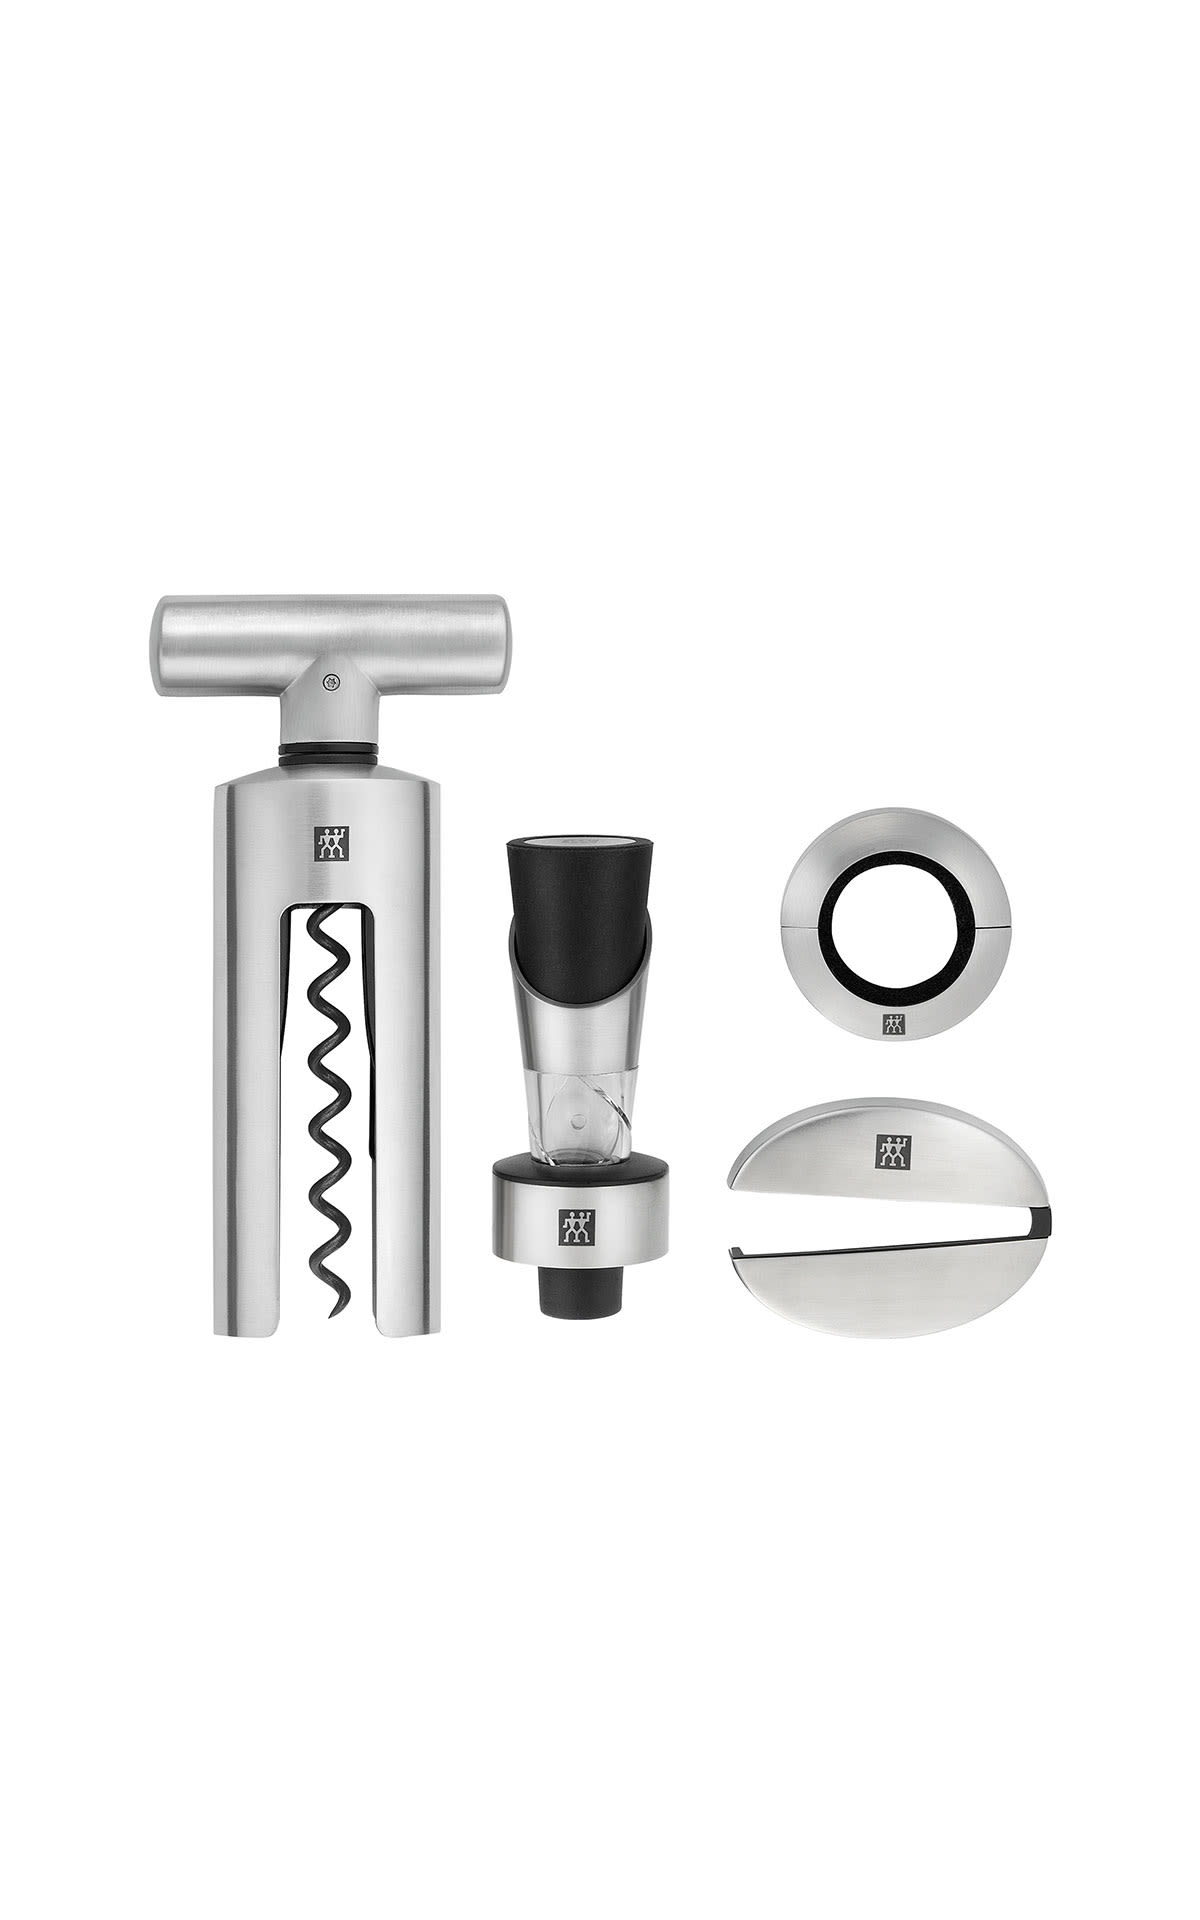 Zwilling Sommelier set from Bicester Village